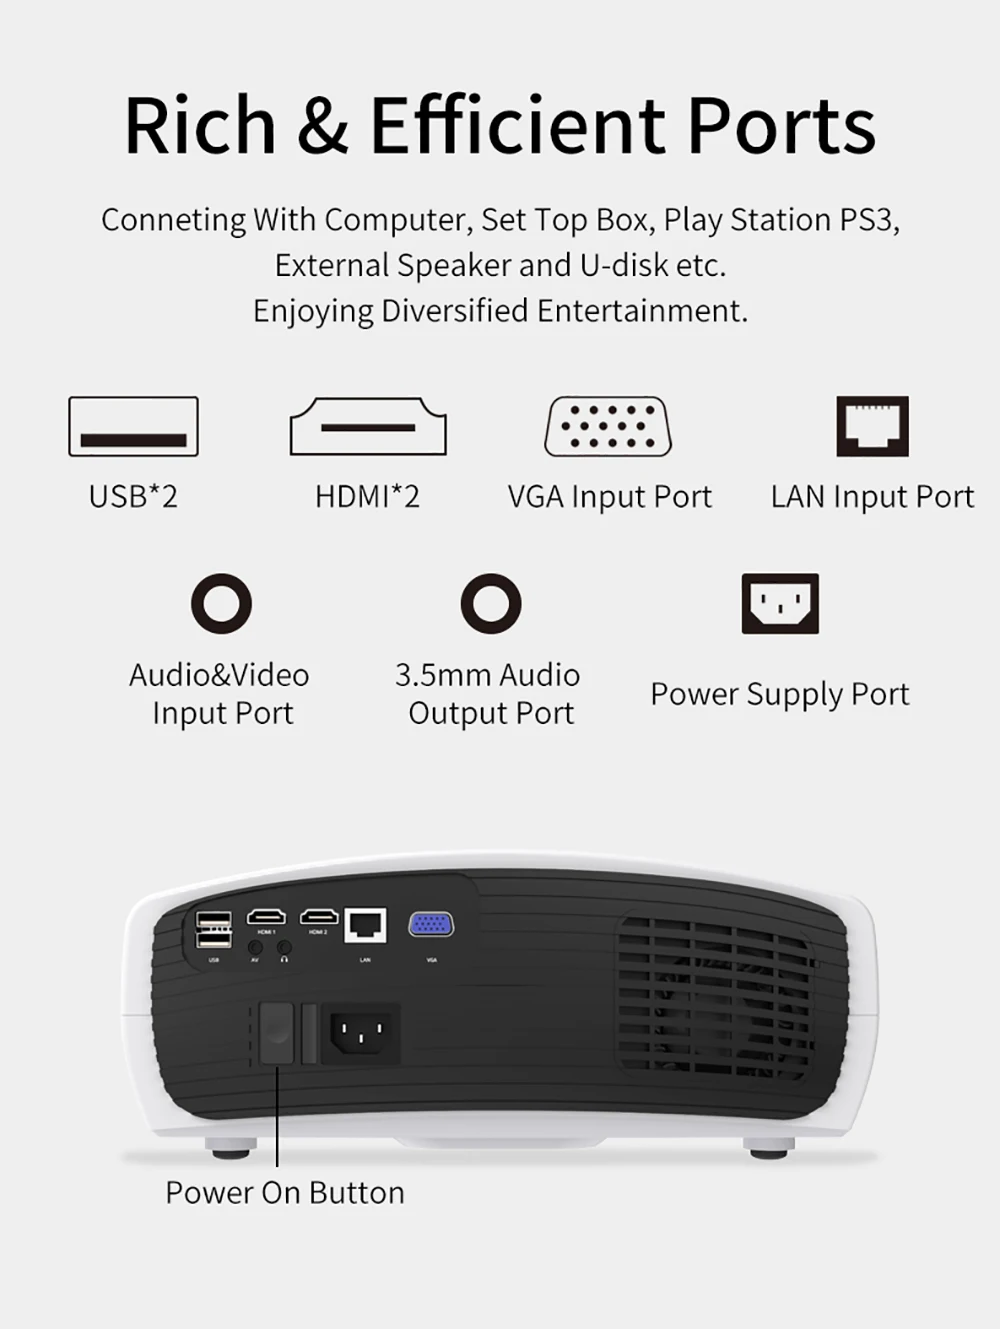 1080p projector Smartldea Build in Android 9.0 2G + 32G Wifi Projector native 1920x1080P Full HD video game Proyector LED 3D Home cinema Beamer projector near me